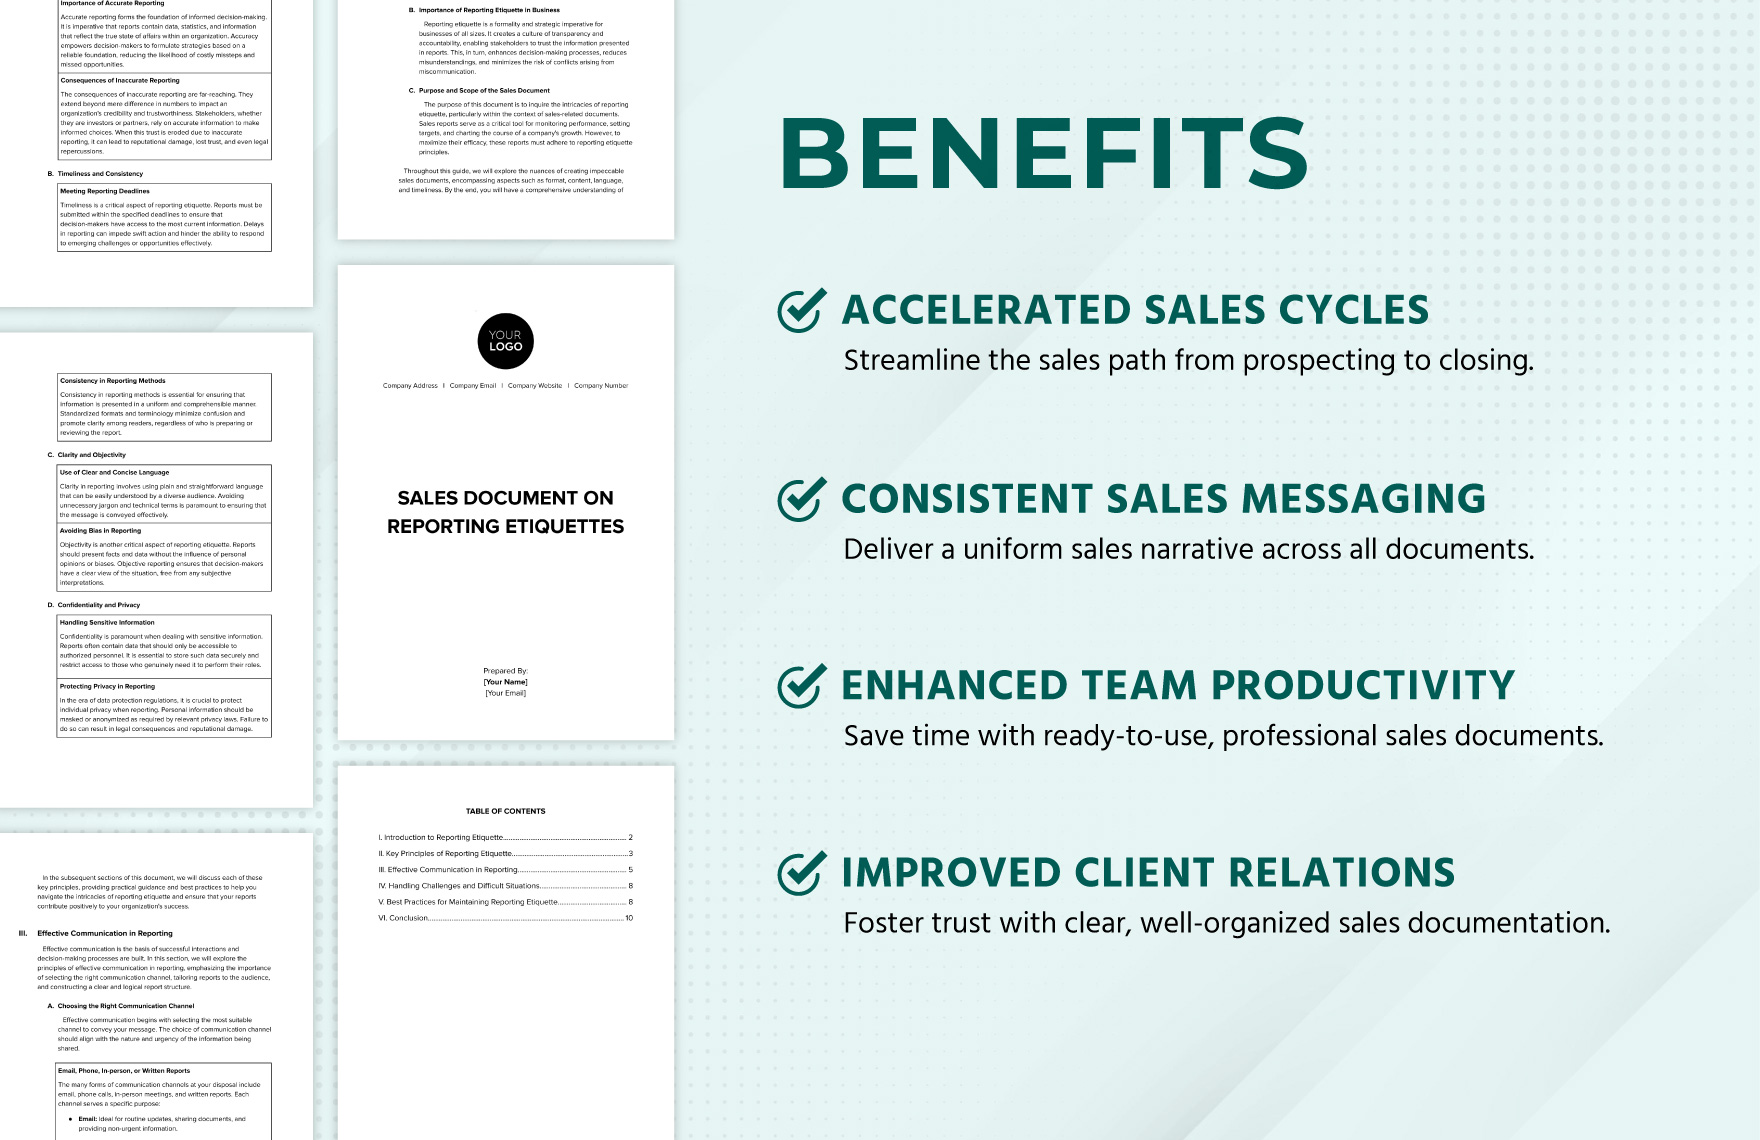 Sales Document on Reporting Etiquettes Template